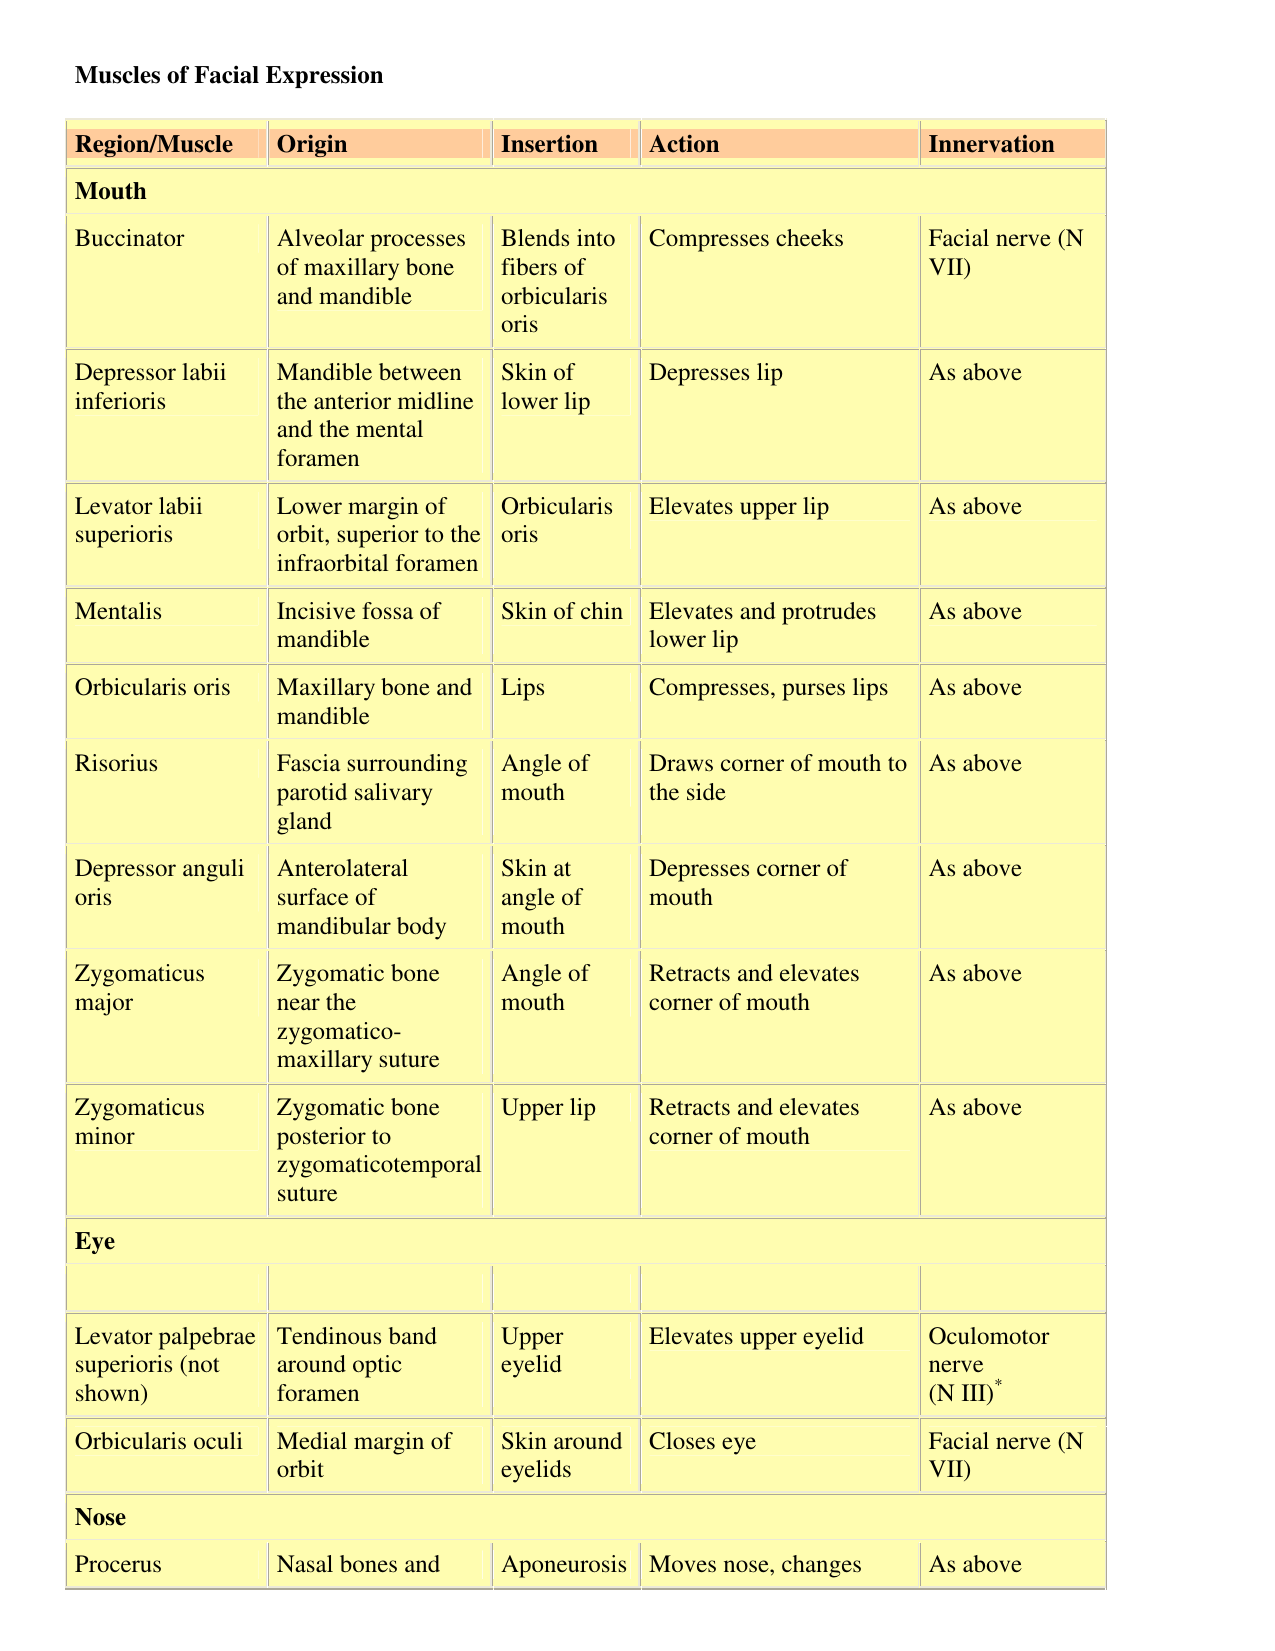 extrinsic foot muscles origin insertions